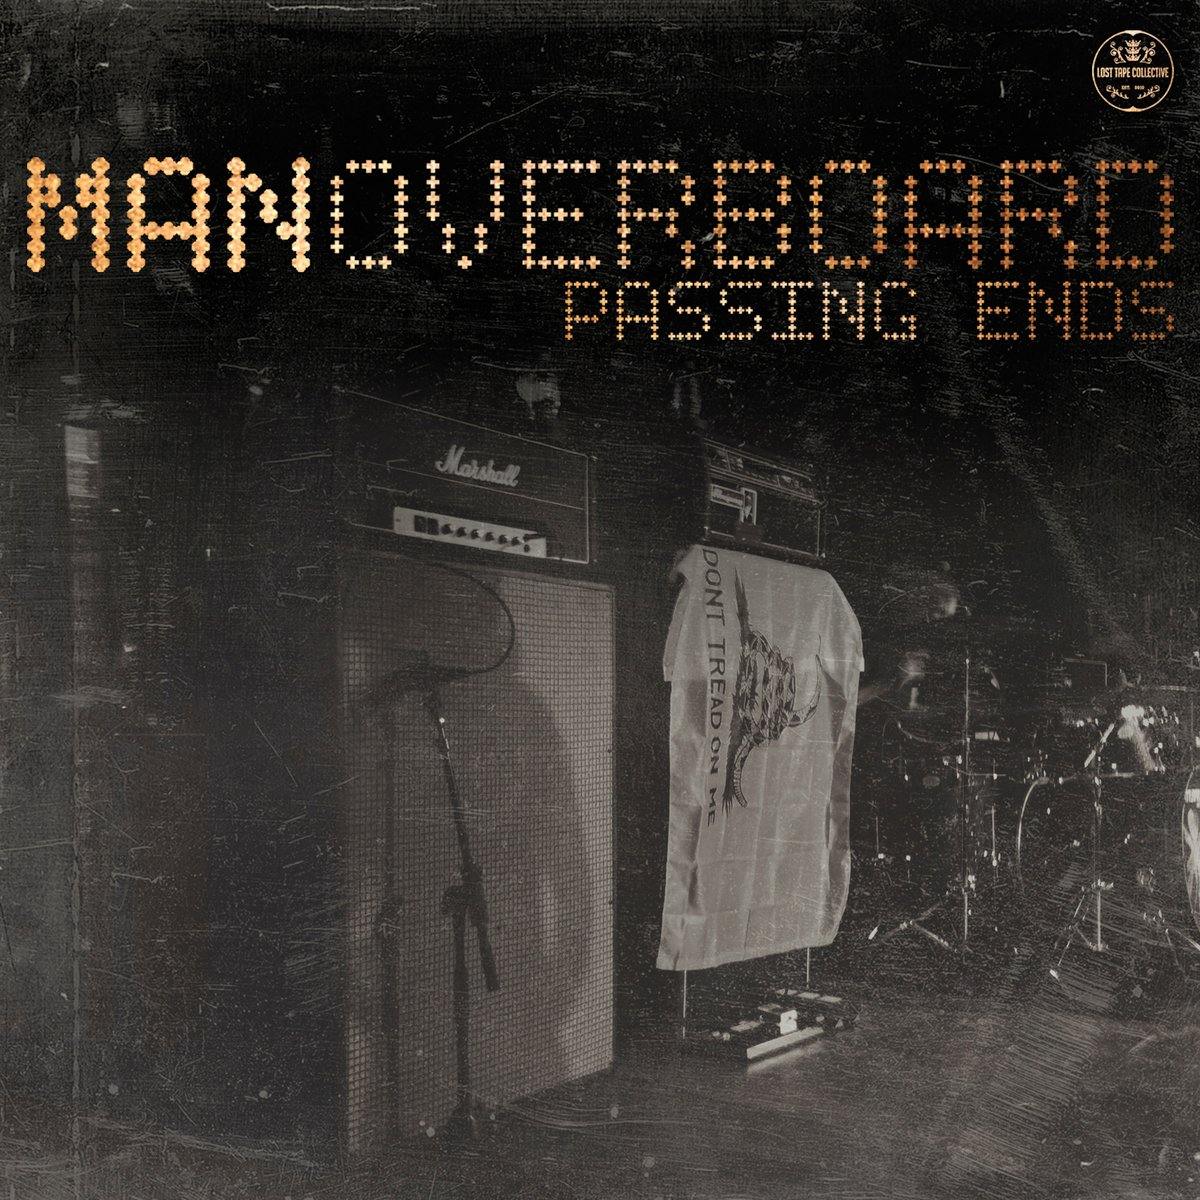 Buy – Man Overboard "Passing Ends" 7" – Band & Music Merch – Cold Cuts Merch